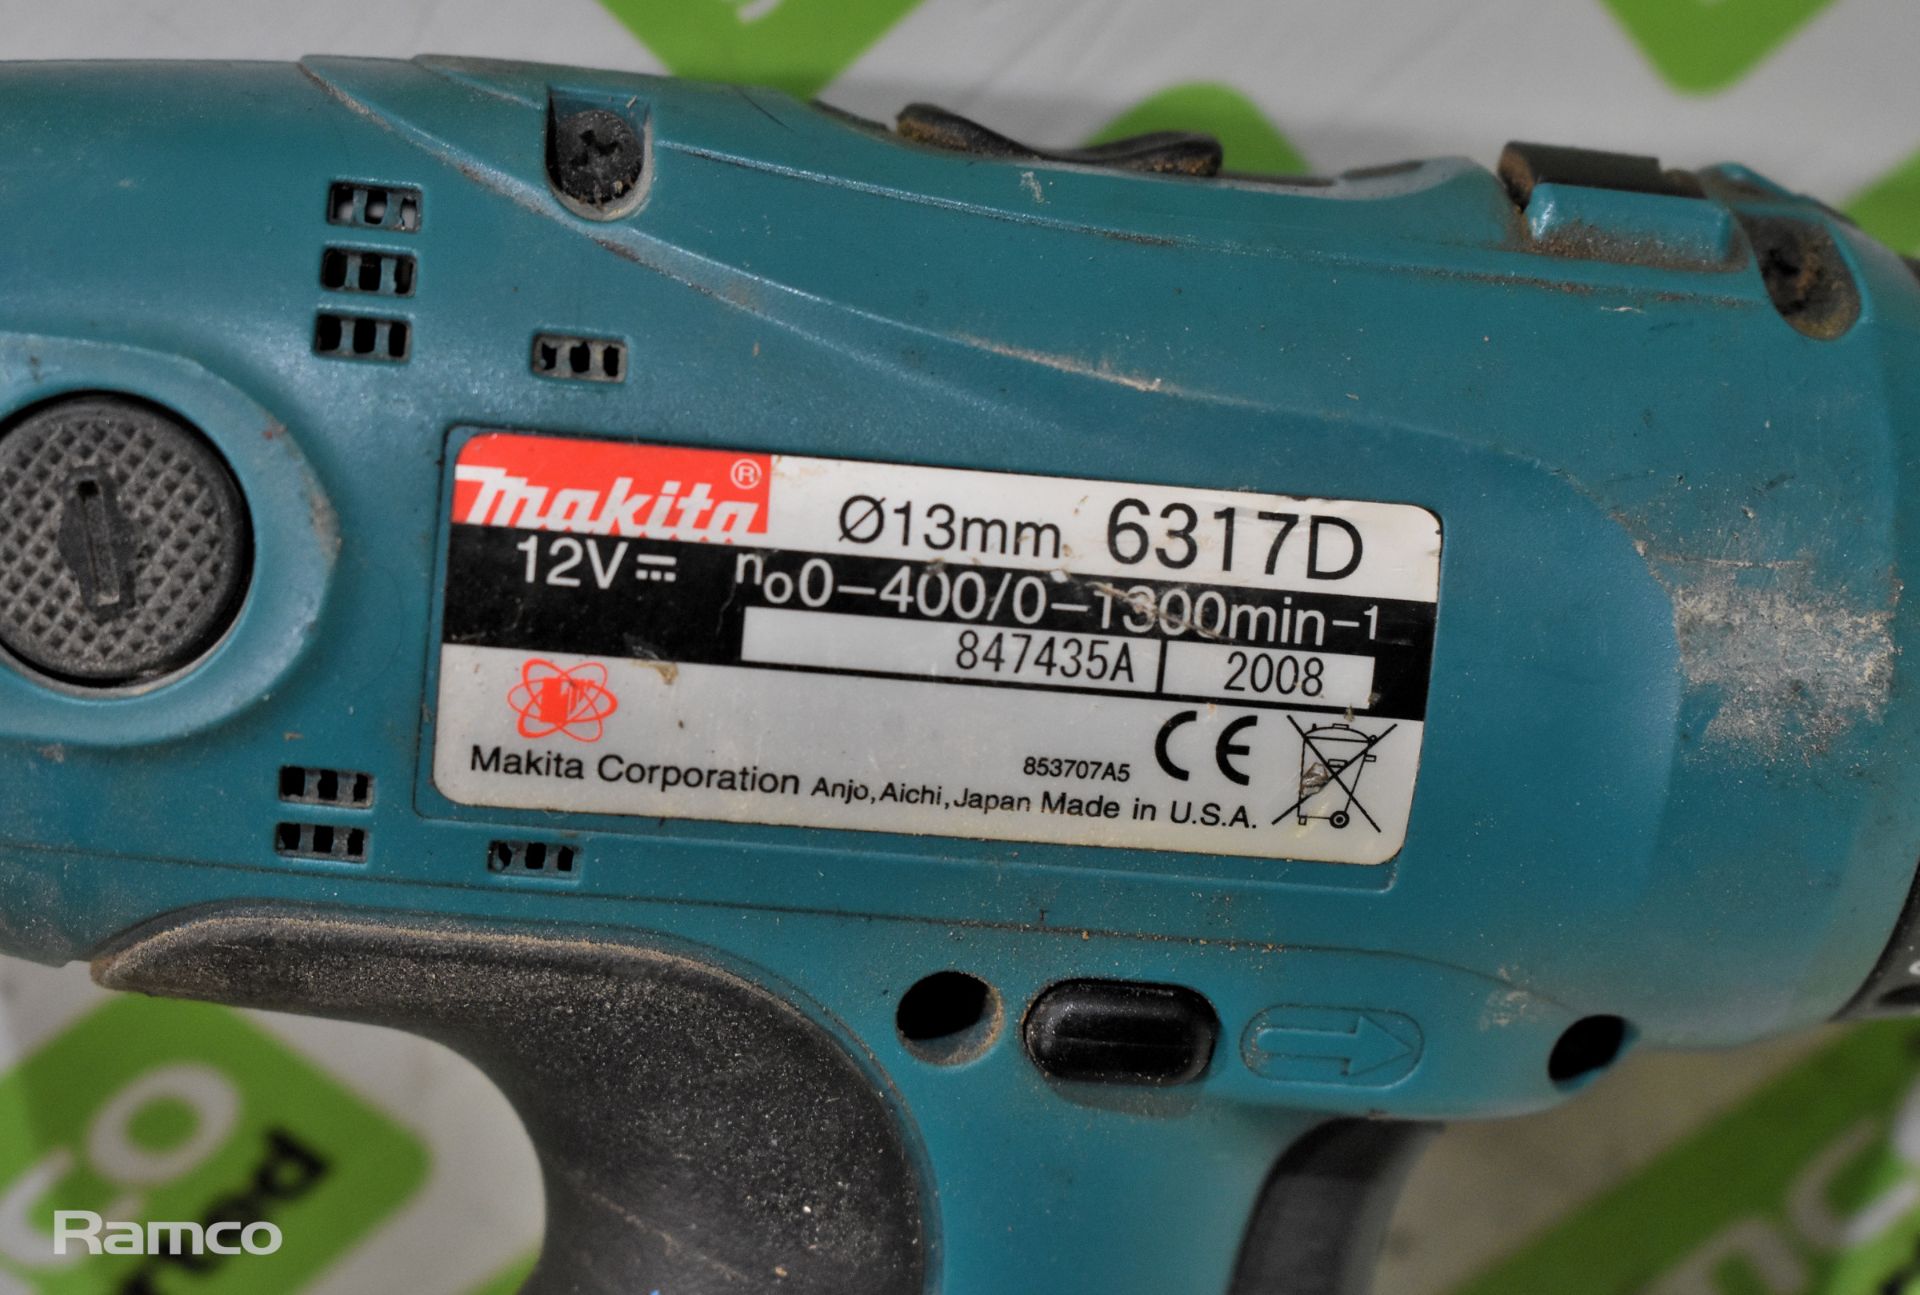 2x Makita 6317D cordless drills - DC1414F charger - 1x 12V battery - case - Image 7 of 8